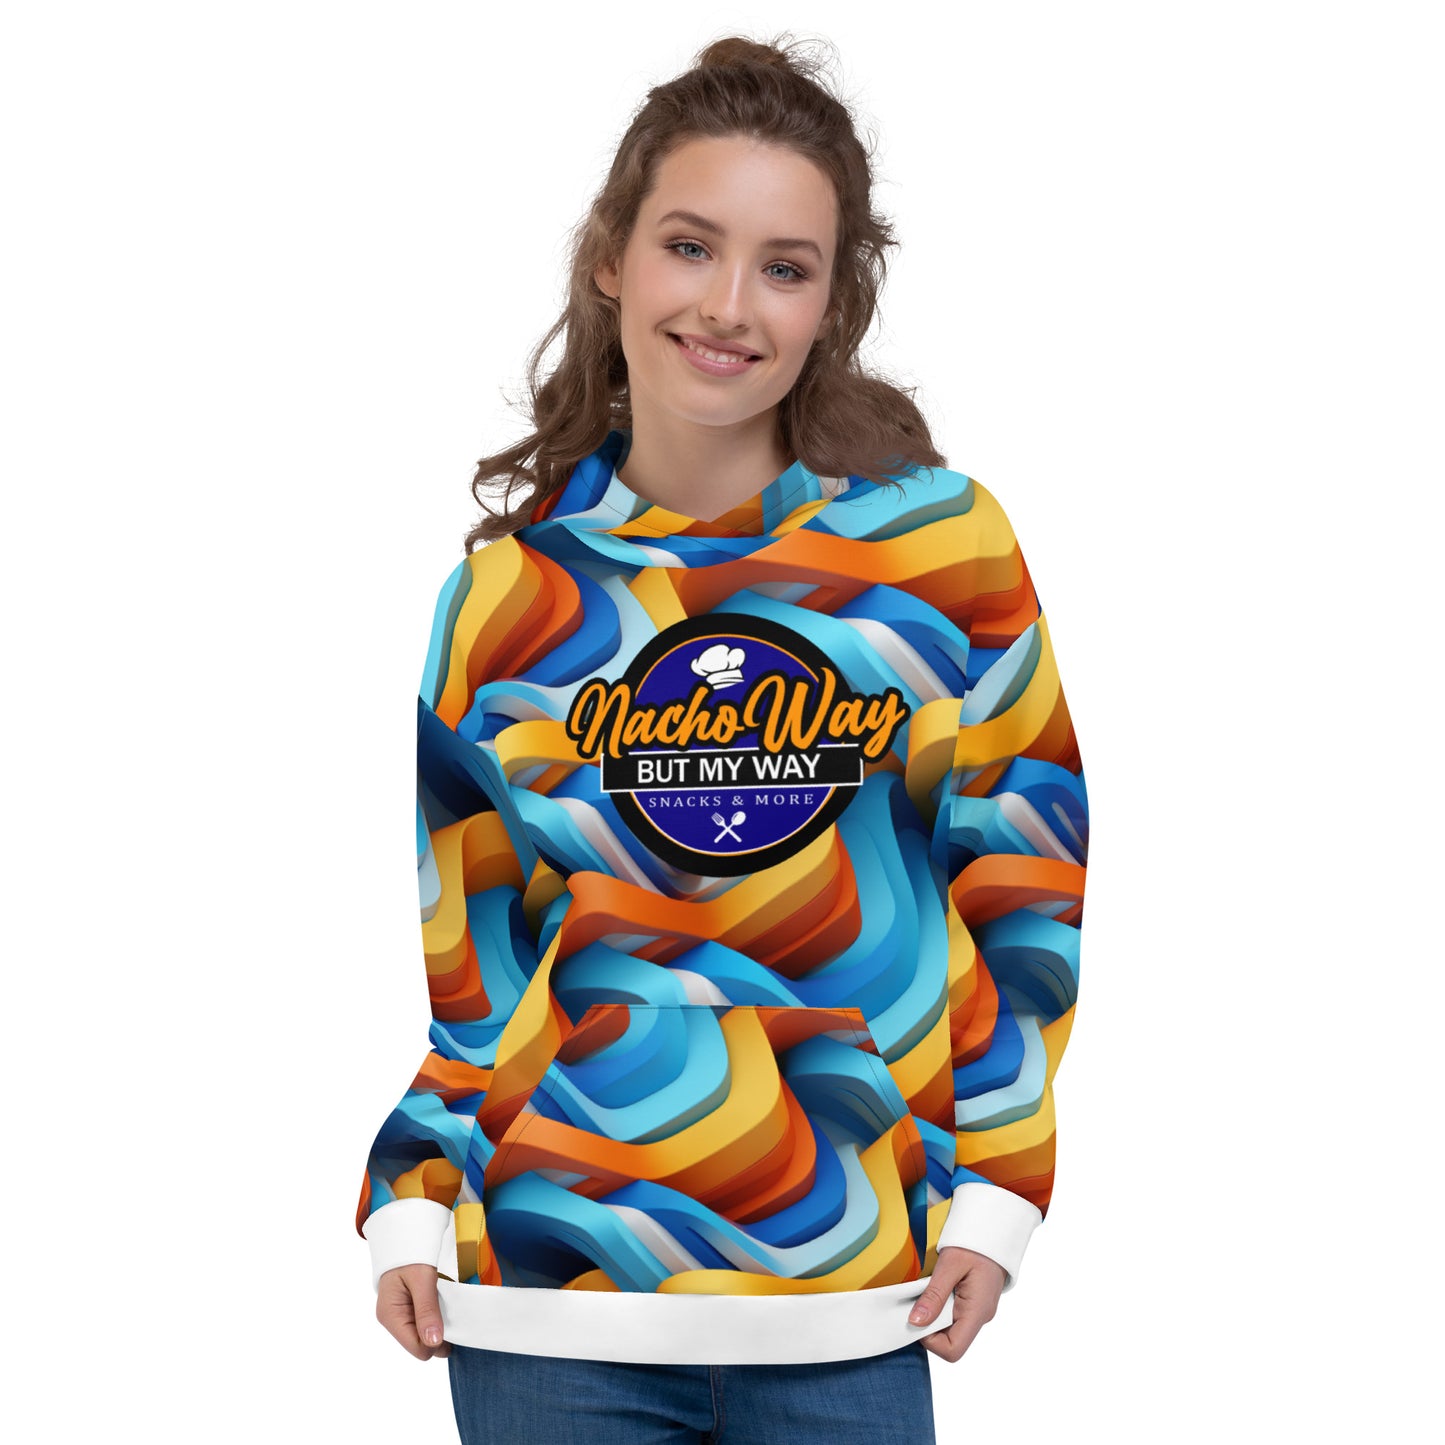 NachoWay "Go With The Flow" Hoodie